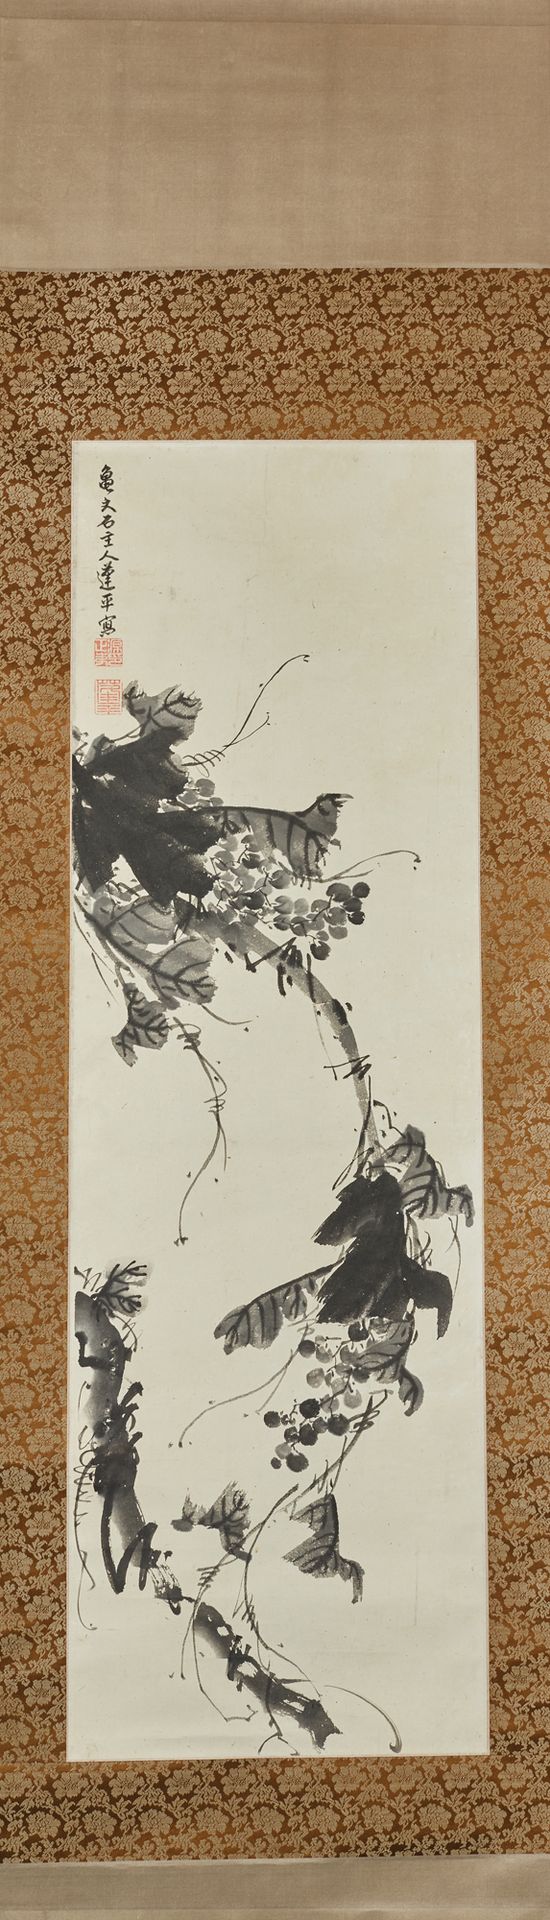 Satake Hohei (?-1807) Ink on paper, branches of vines. Signed.
Dim. 95 x 30 cm.
&hellip;